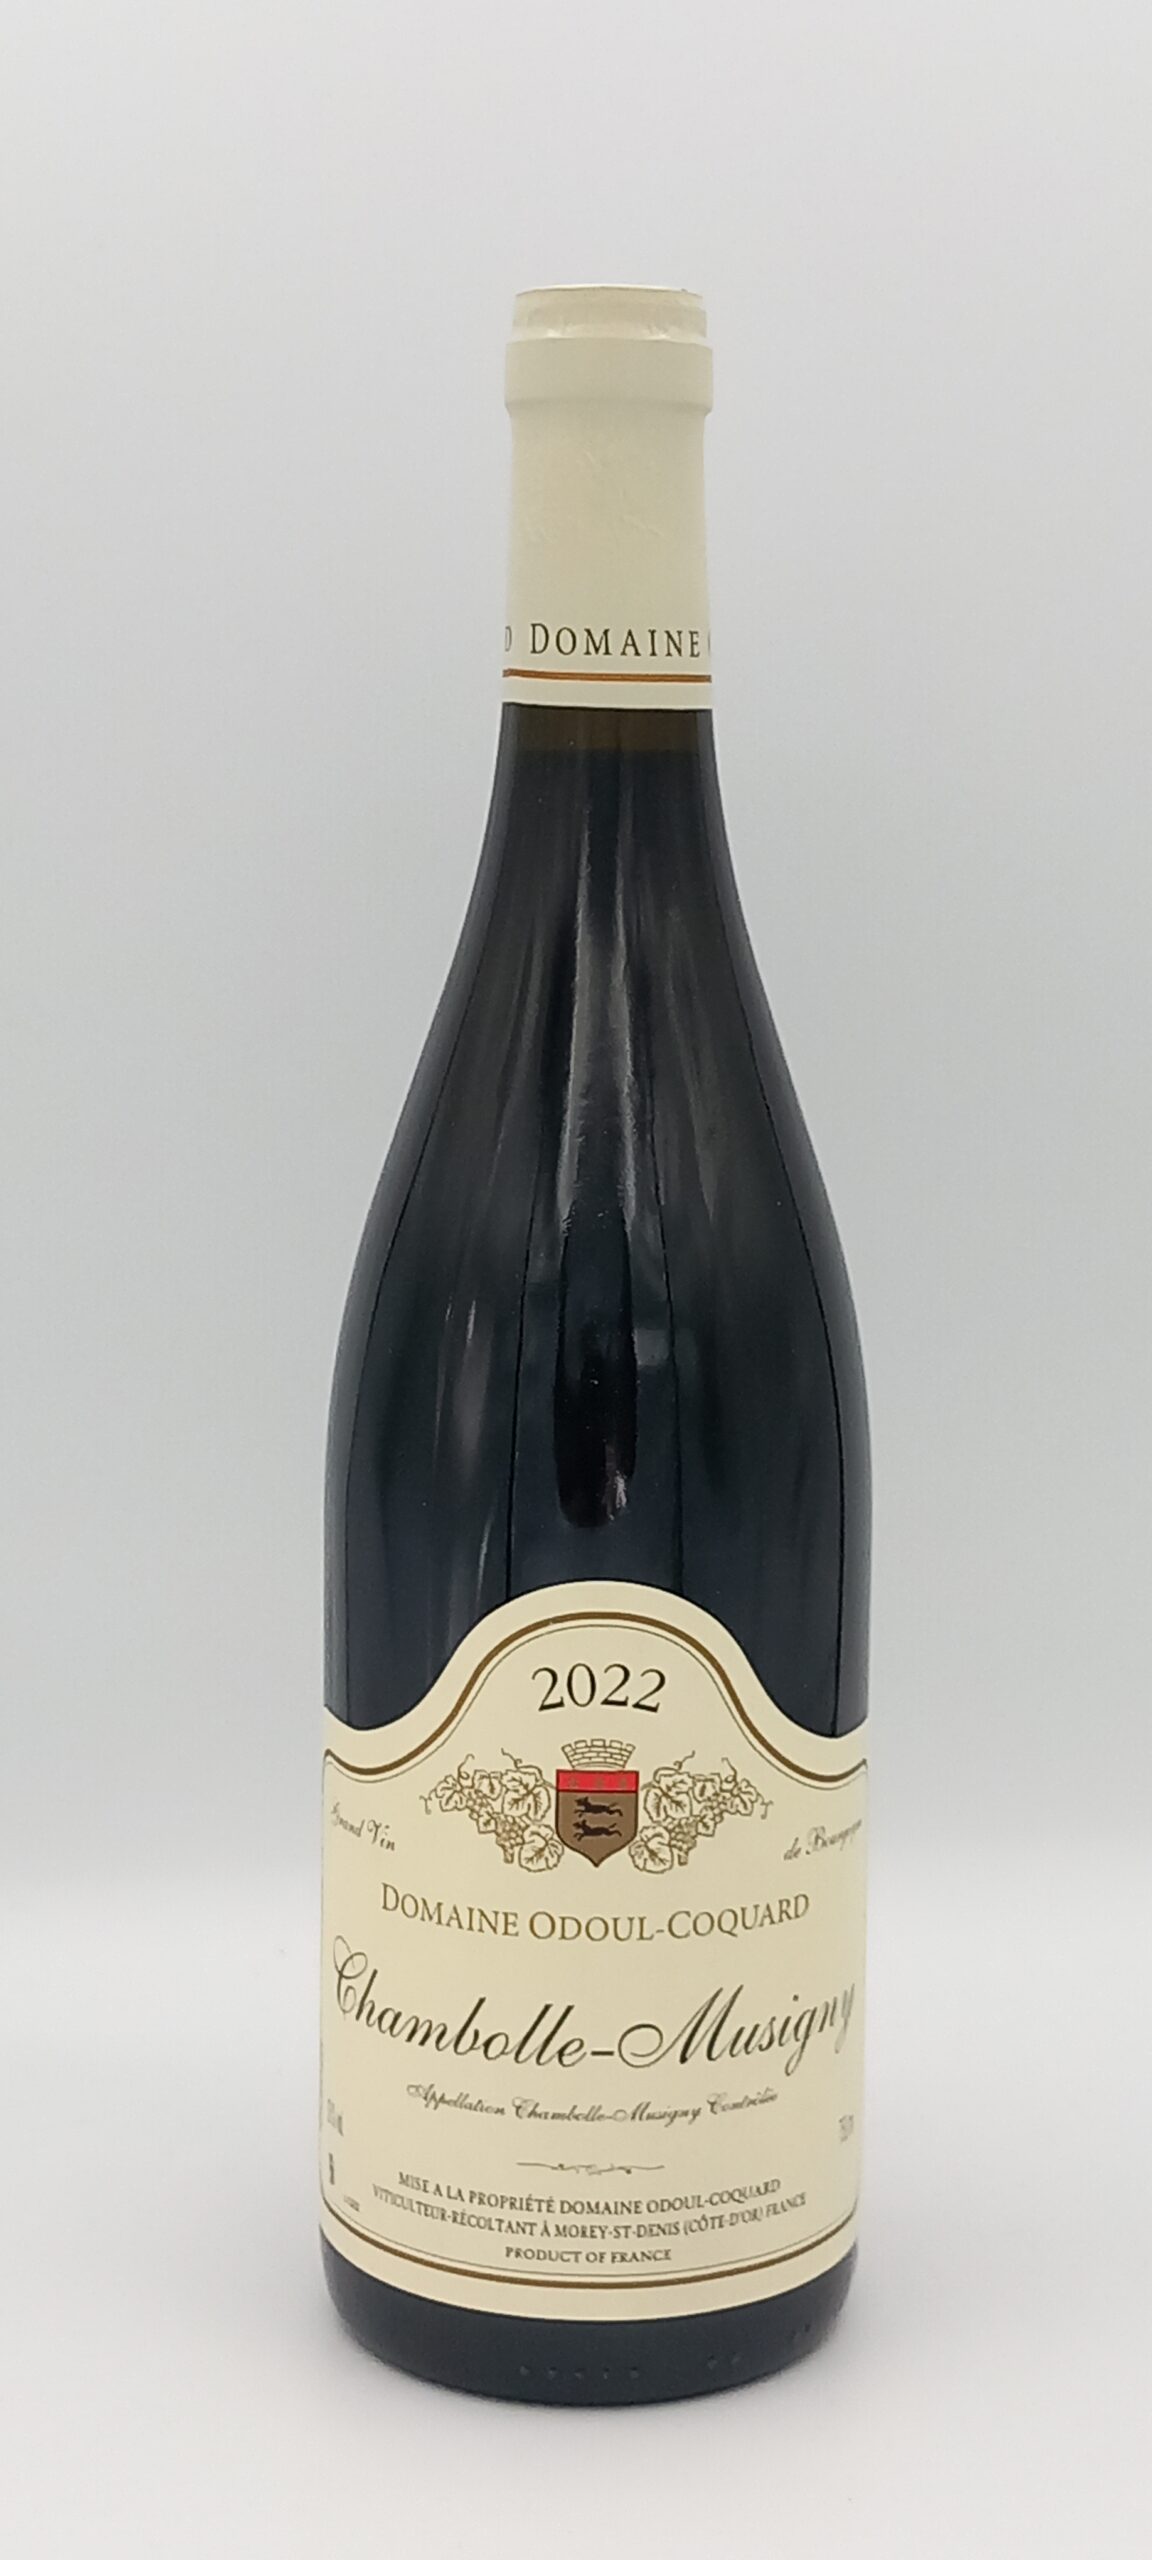 BOURGOGNE CHAMBOLLE MUSIGNY 2022 ROUGE DOMAINE ODOUL COQUARD